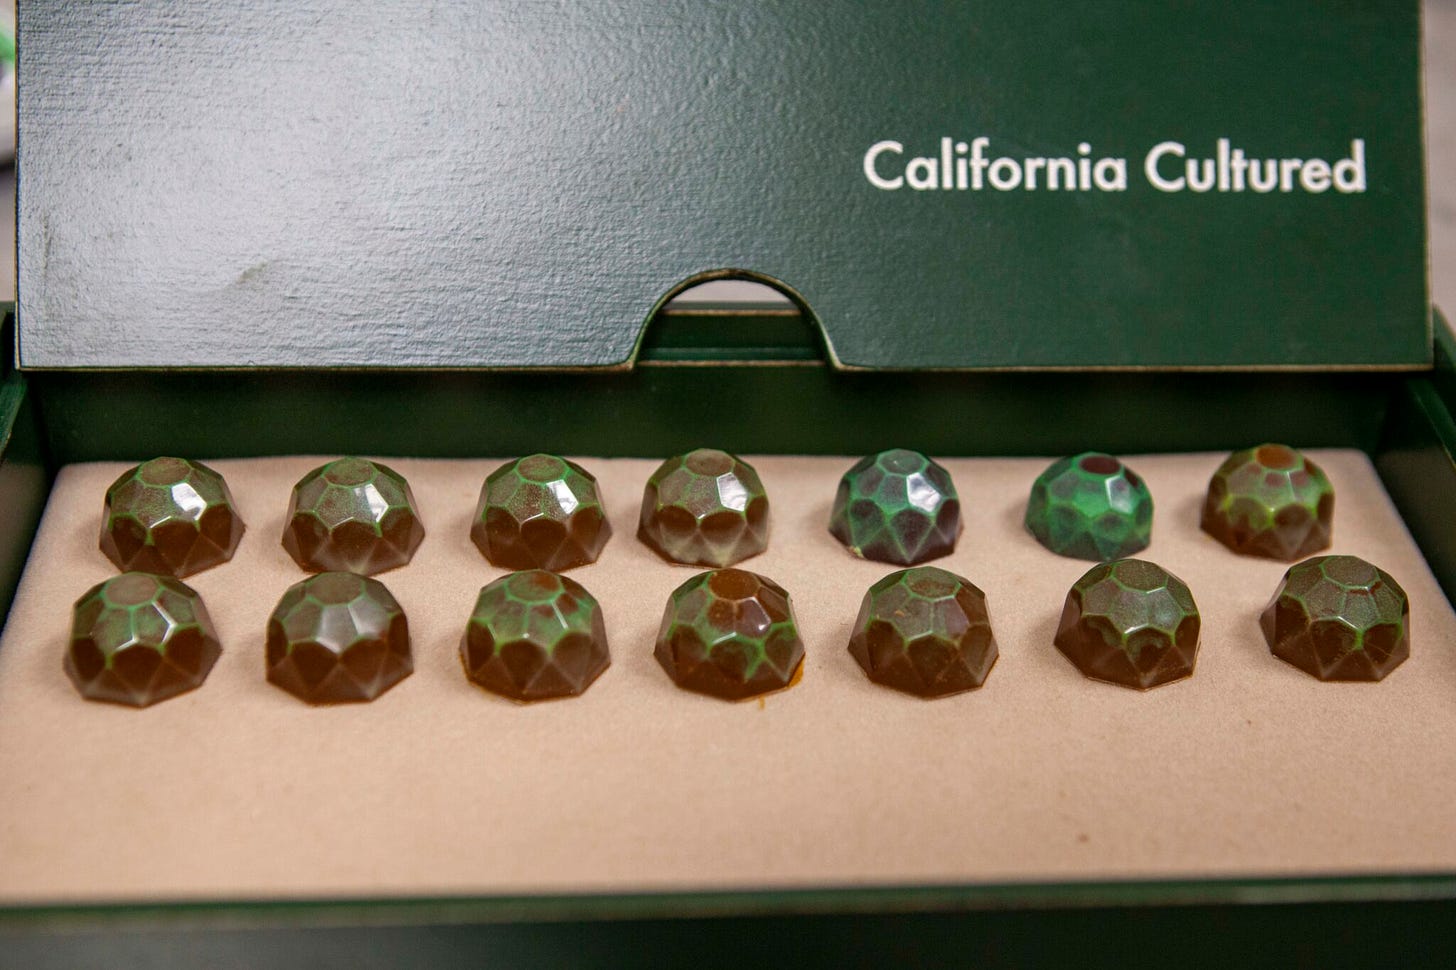 California Cultured Partners with Japanese Chocolate Giant Meiji for  Cell-Based Chocolate Products - IndieBio - #1 in Early Stage Biotech